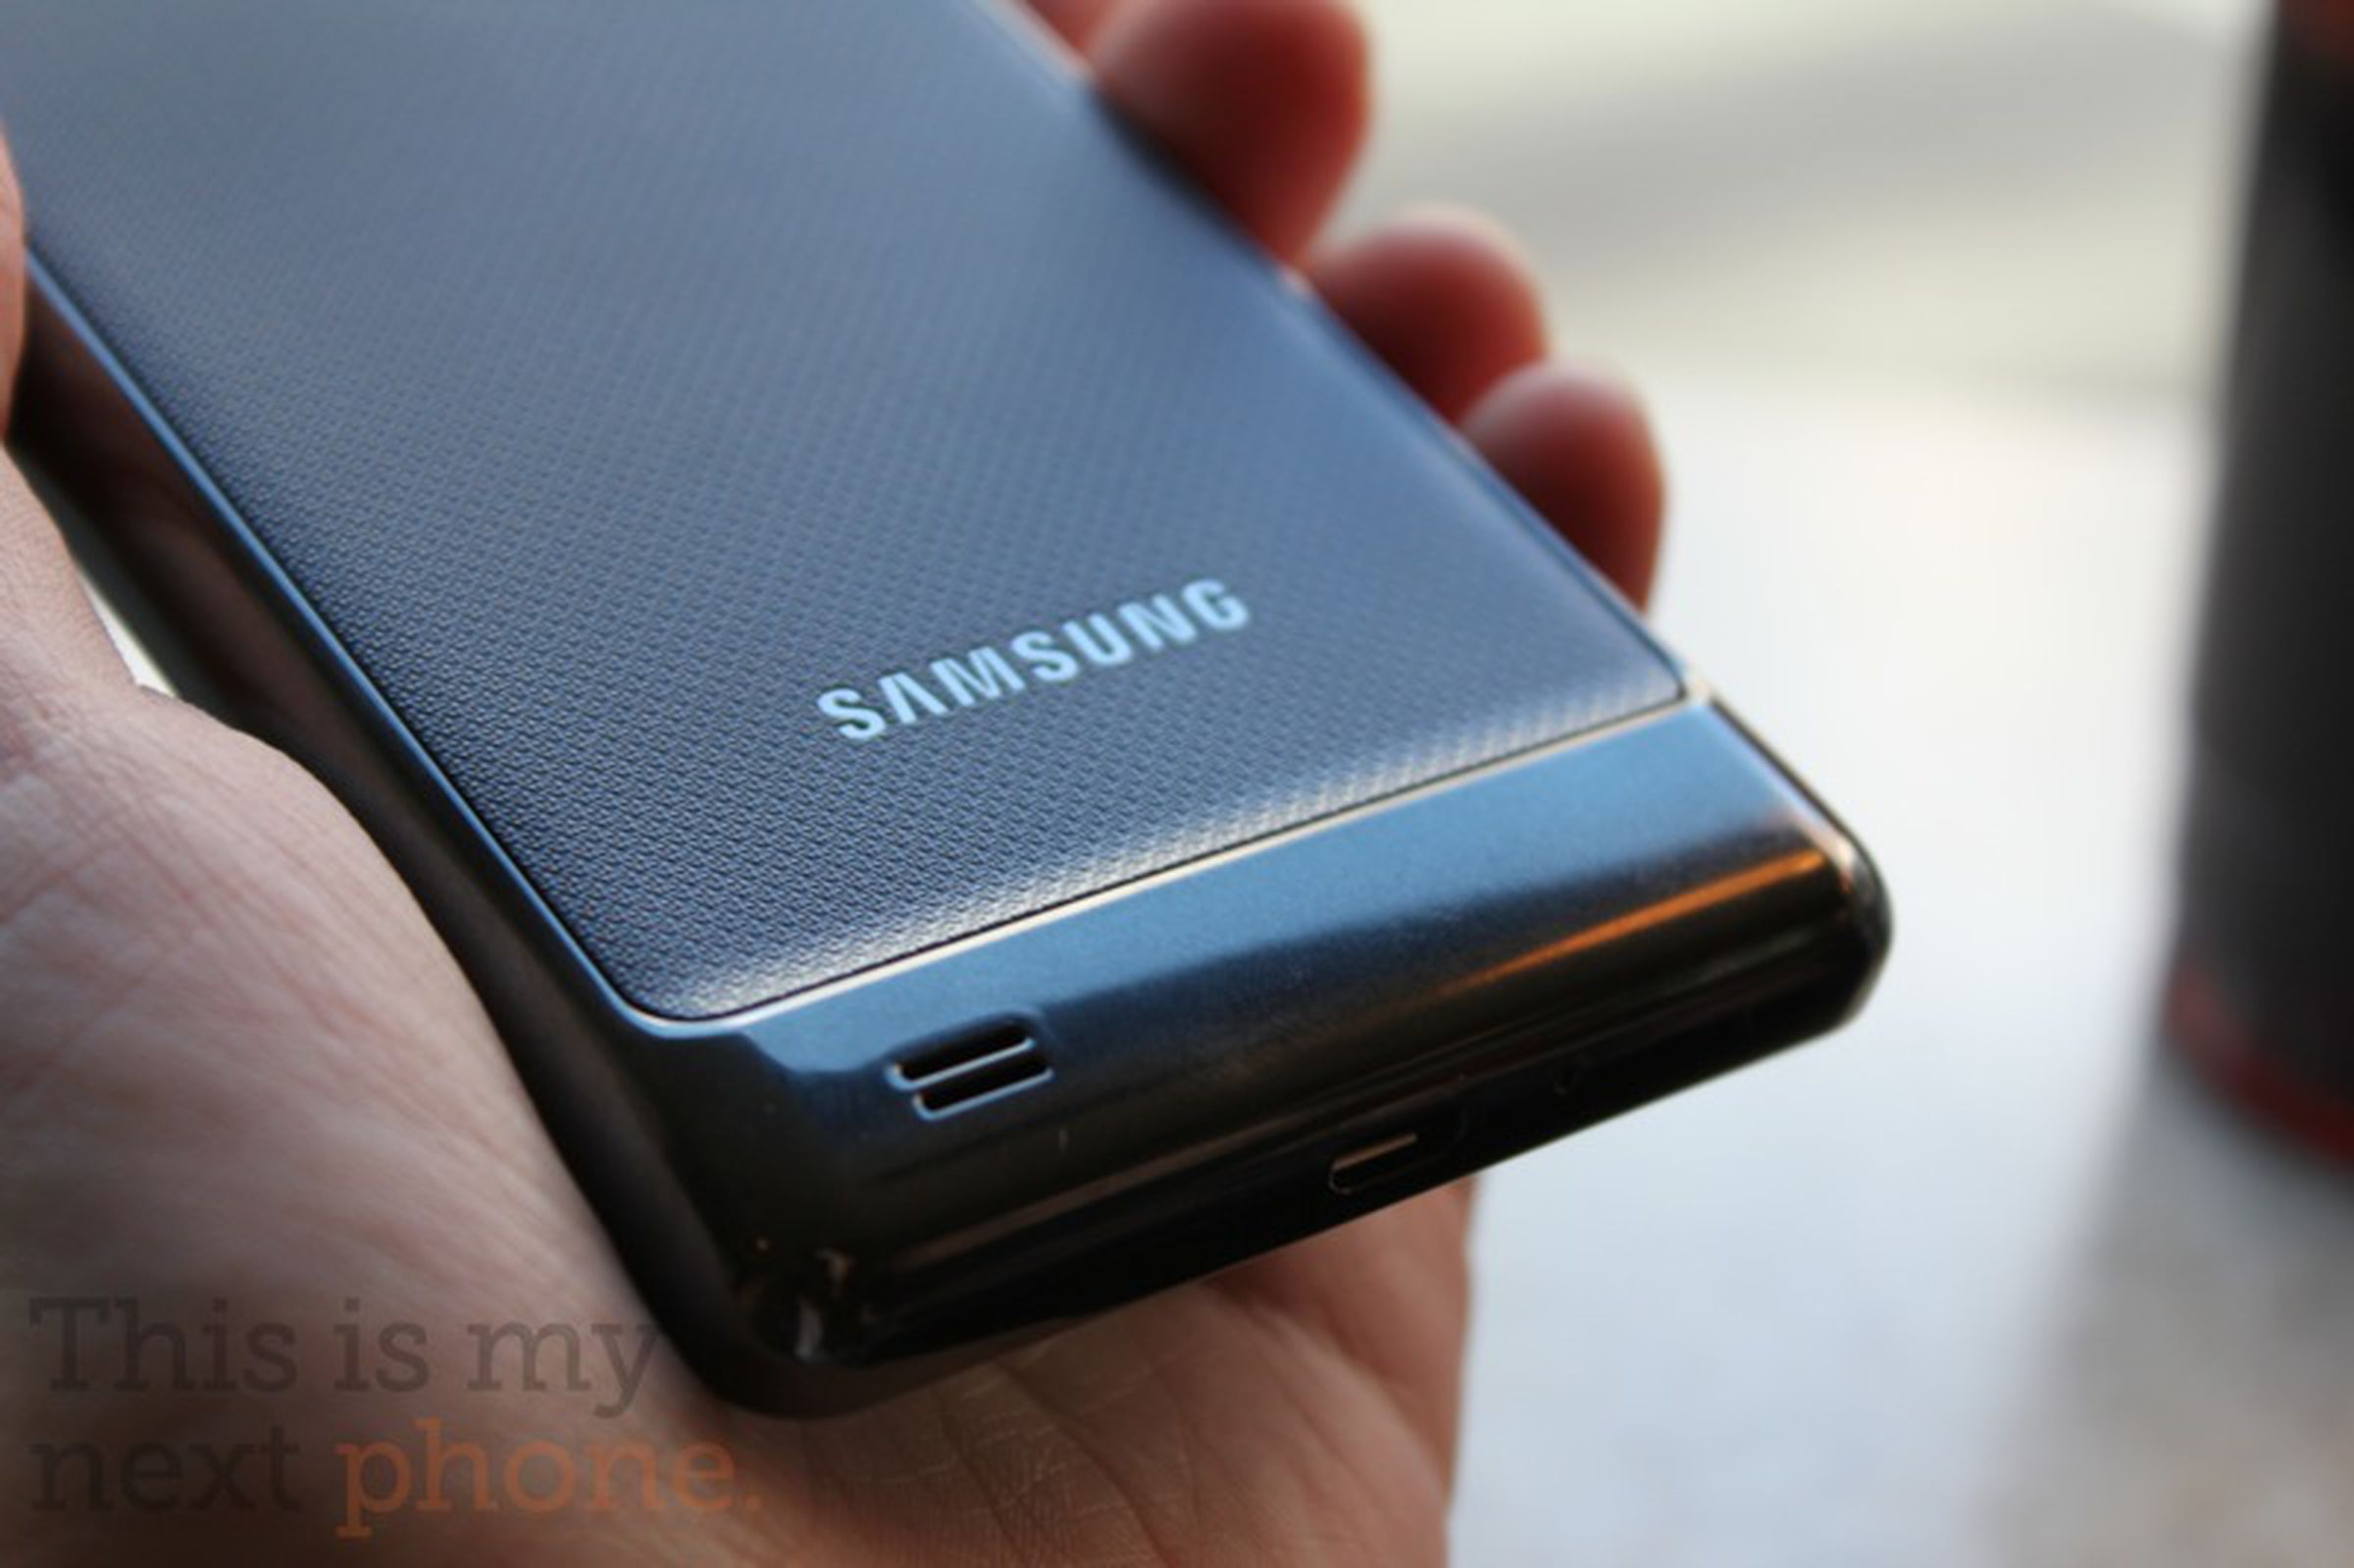 Samsung Infuse 4G for AT&T: comparison with Galaxy S II